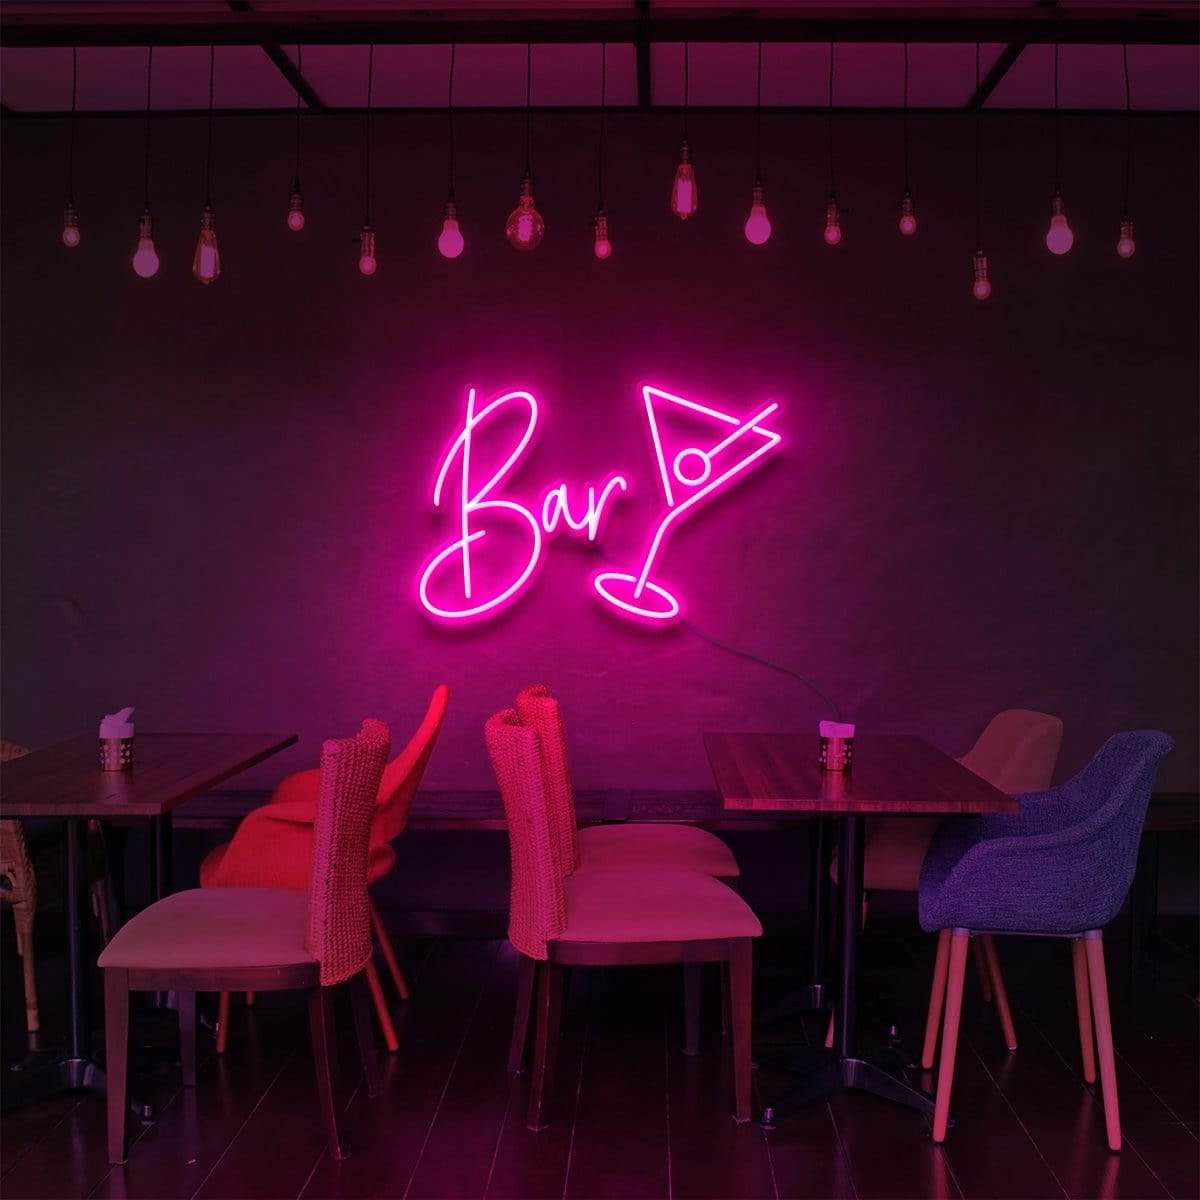 "Bar" Neon Sign for Bars & Restaurants 60cm (2ft) / Pink / LED Neon by Neon Icons